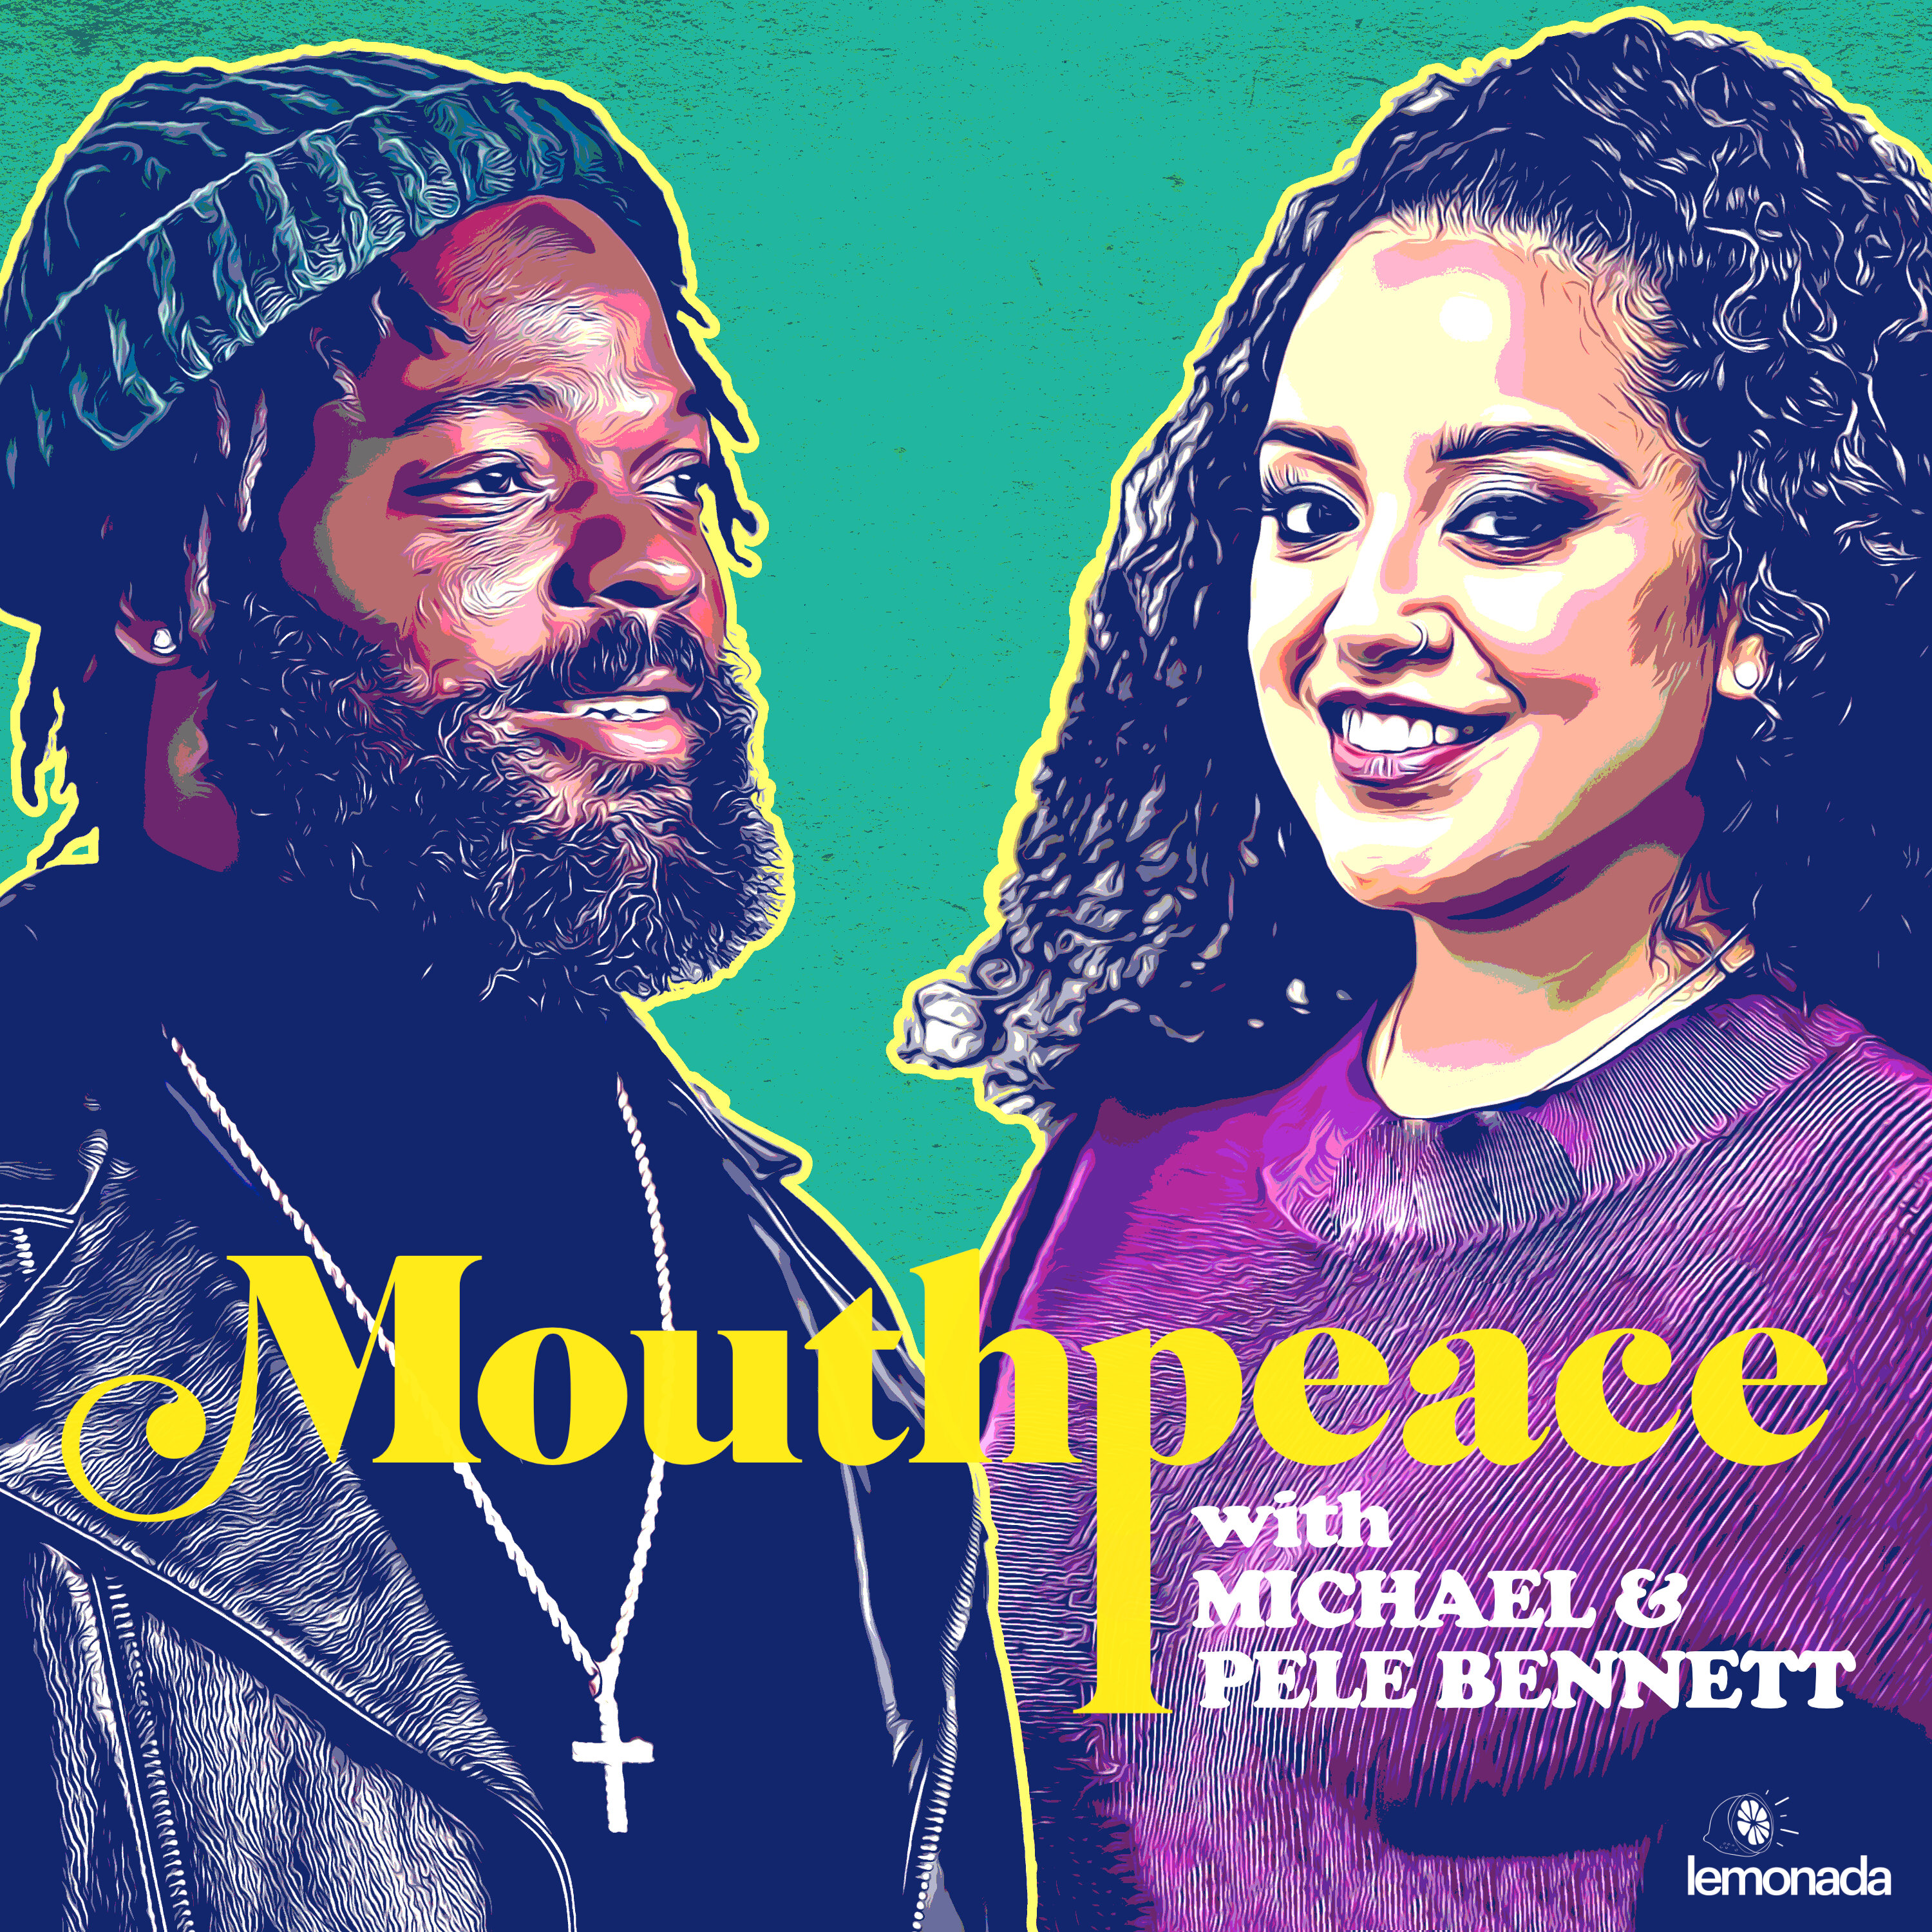 Official Trailer: Mouthpeace with Michael and Pele Bennett